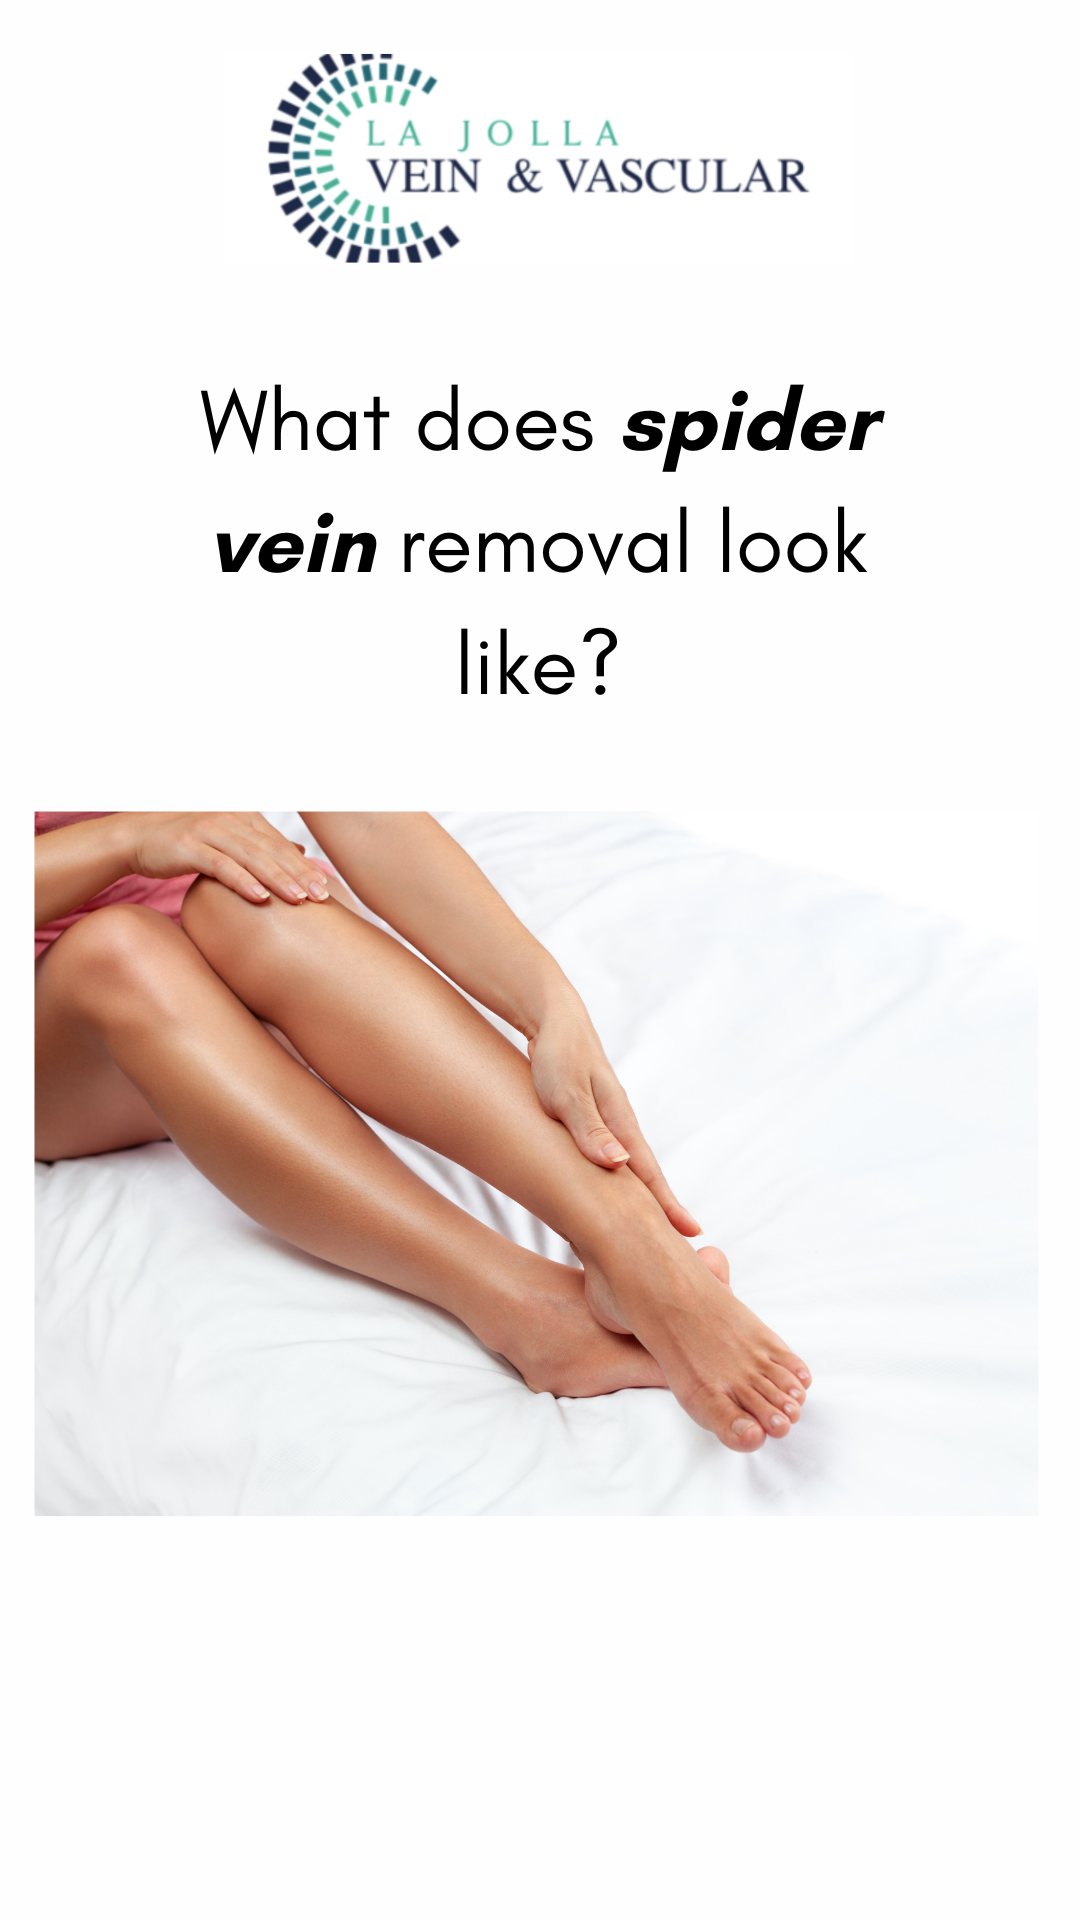 What Does Spider Vein Removal Look Like? – La Jolla Vein Care